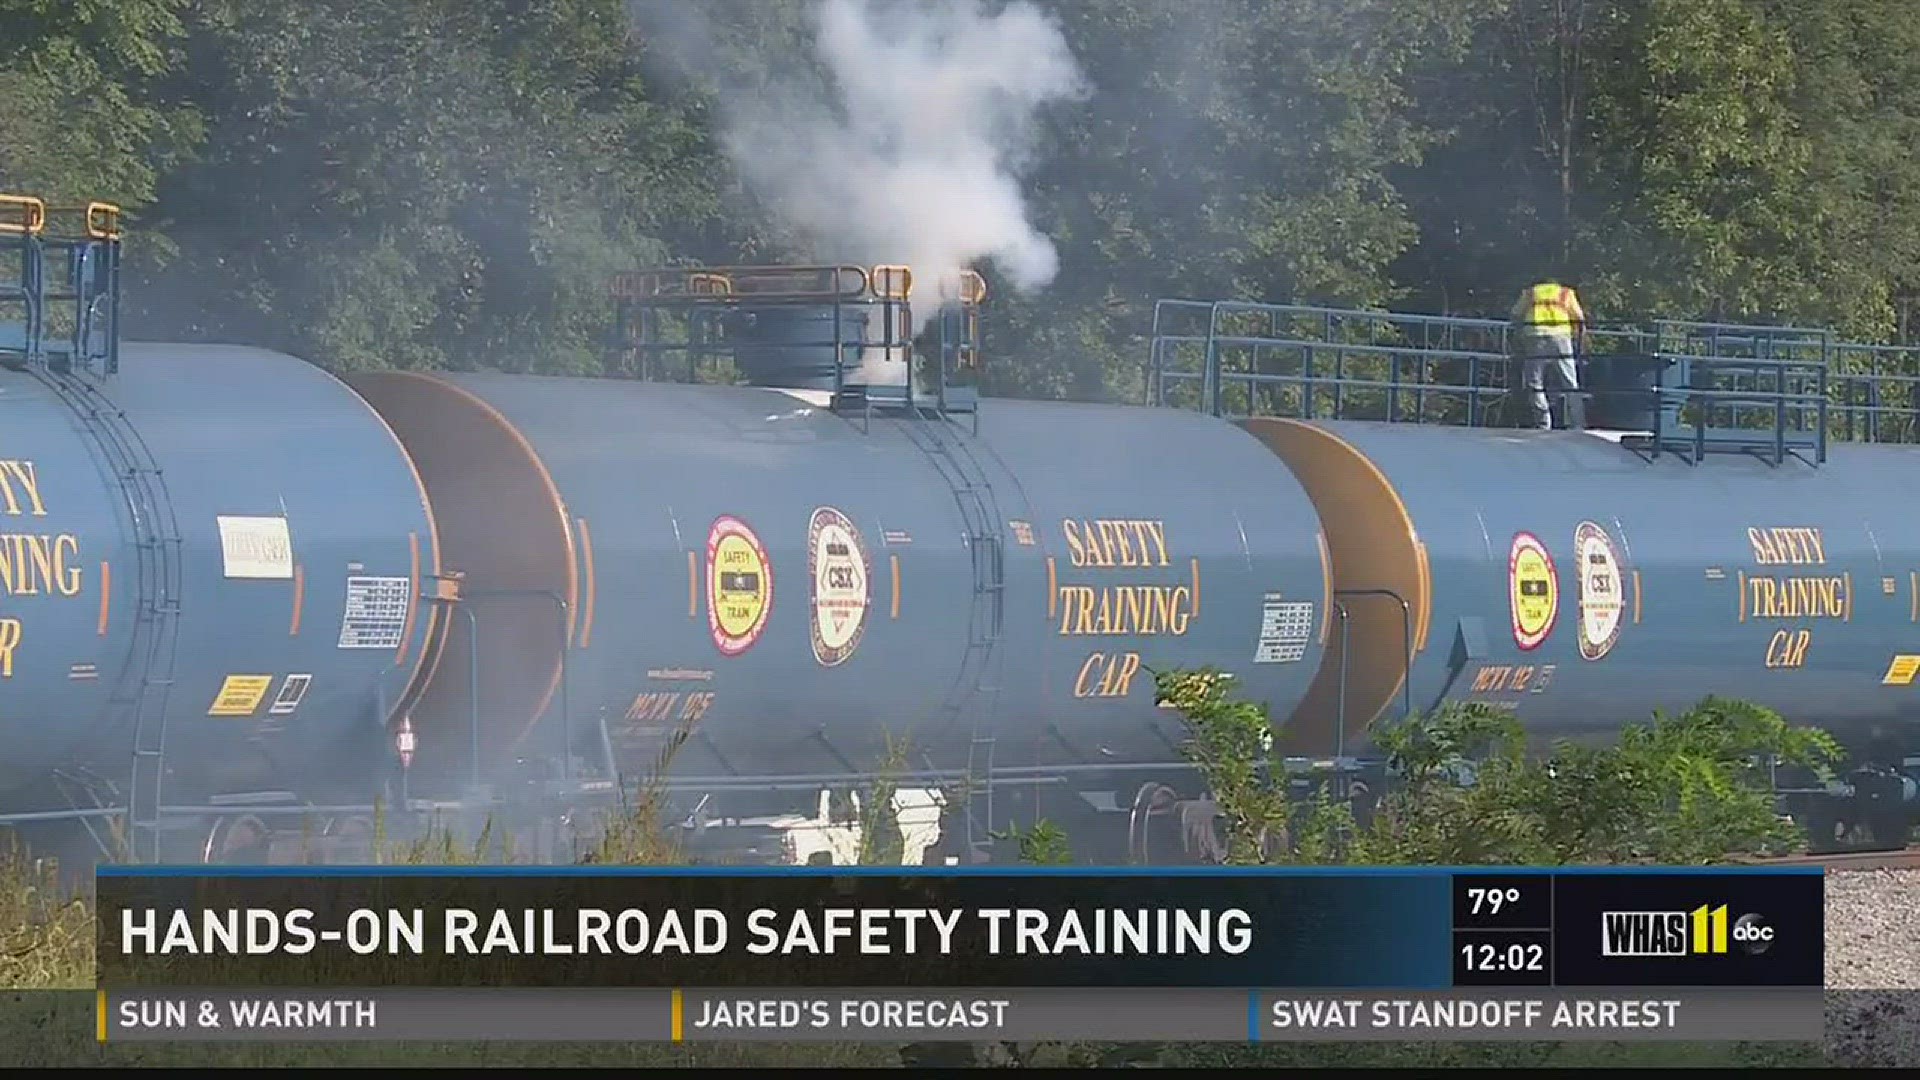 Hands-on railroad safety training